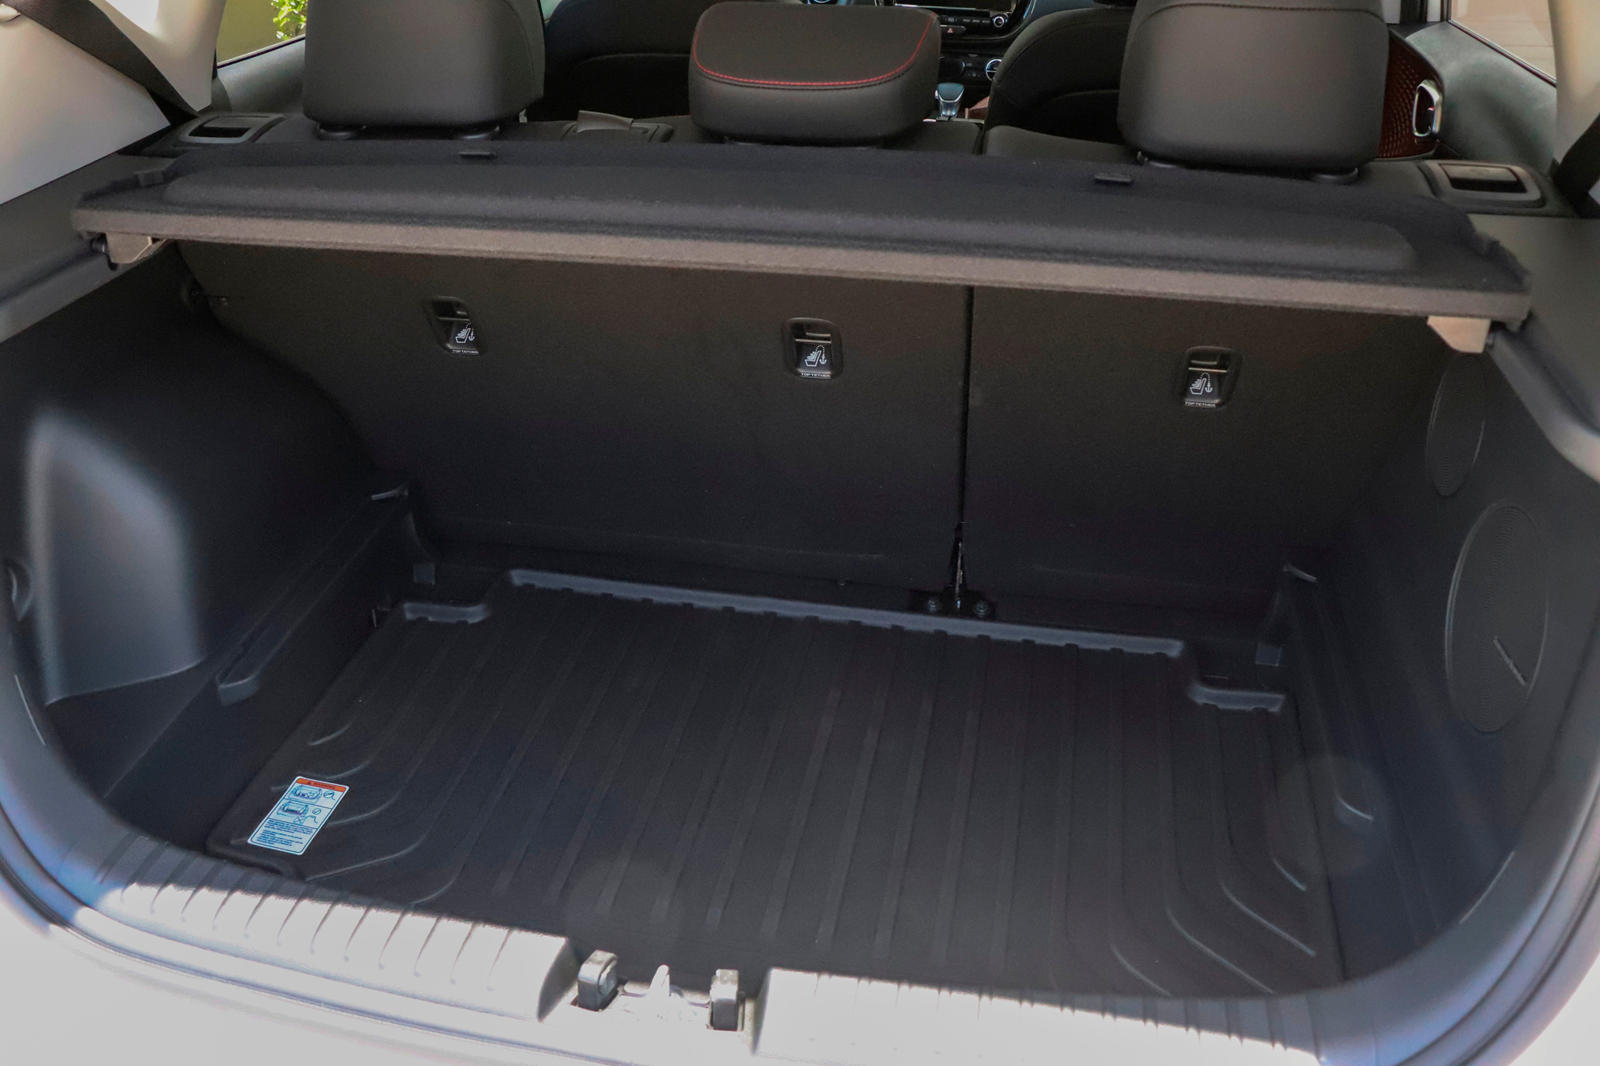 How Long Is A Kia Soul: What Are The Trunk Dimensions?